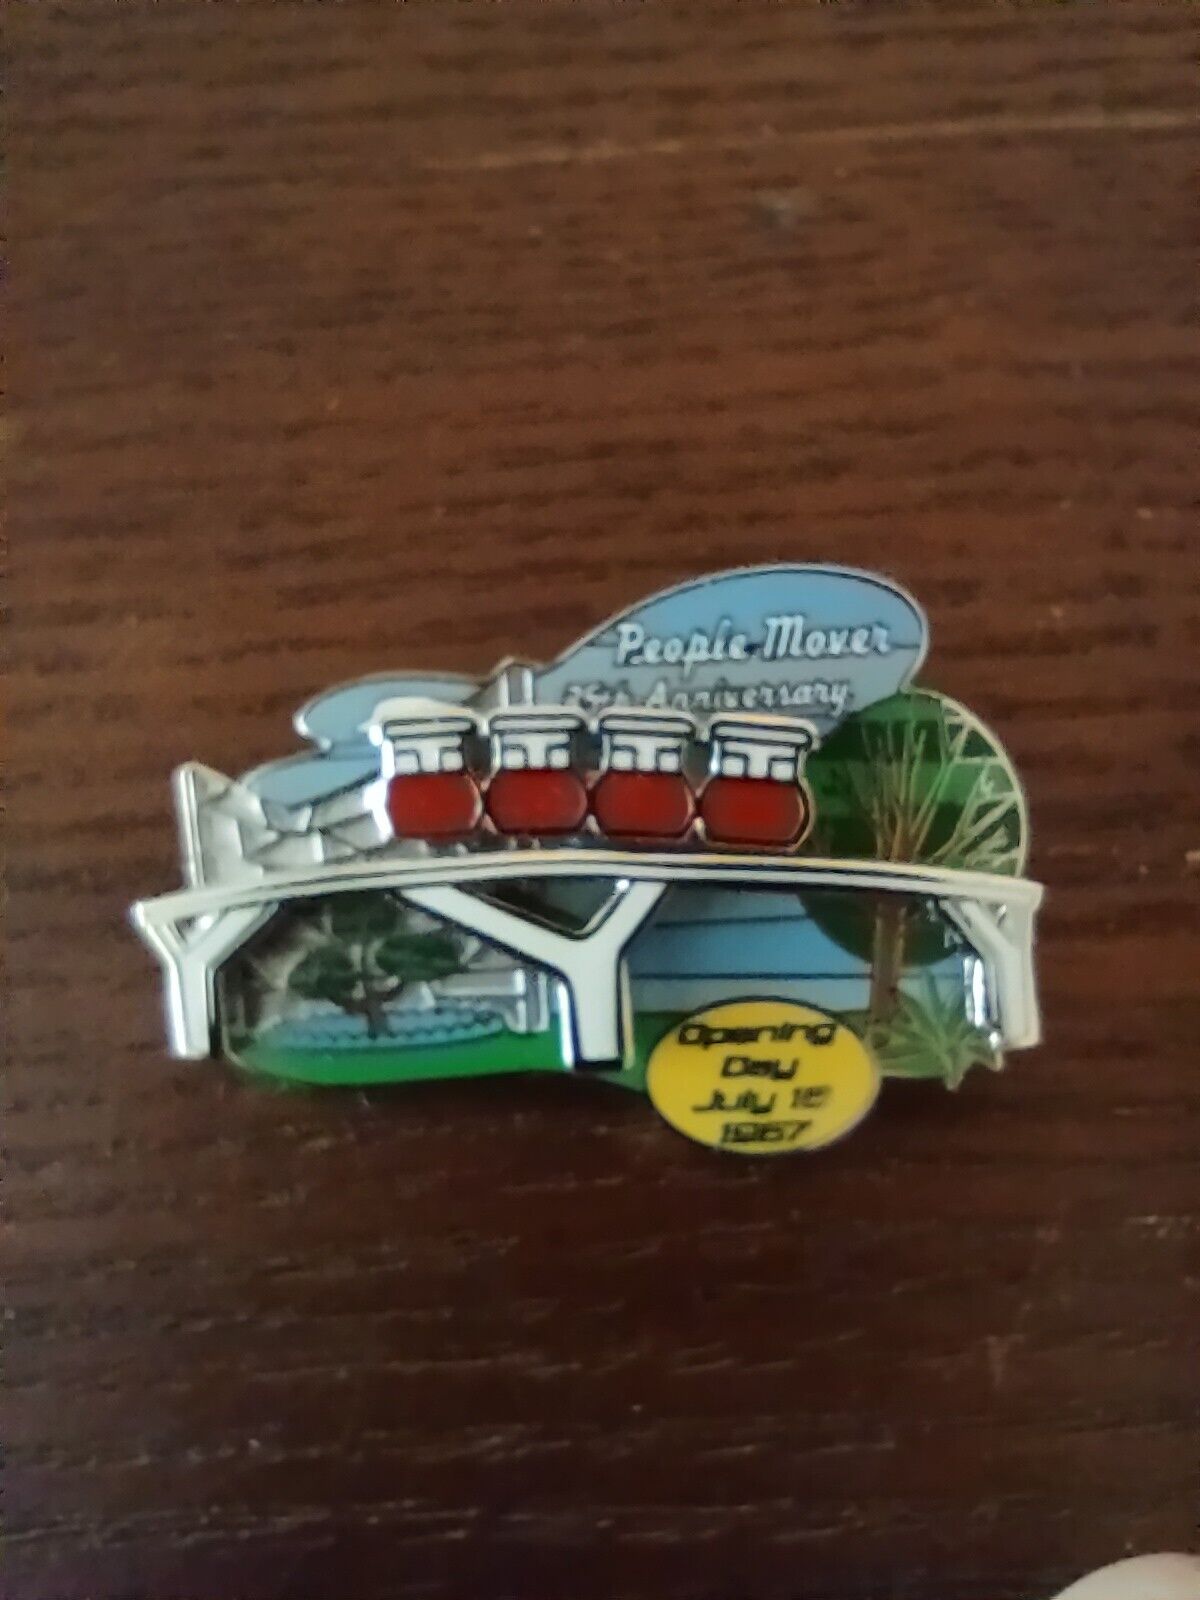 Disneyland DLR People Mover Slider Pin LE 1500 35th Anniversary